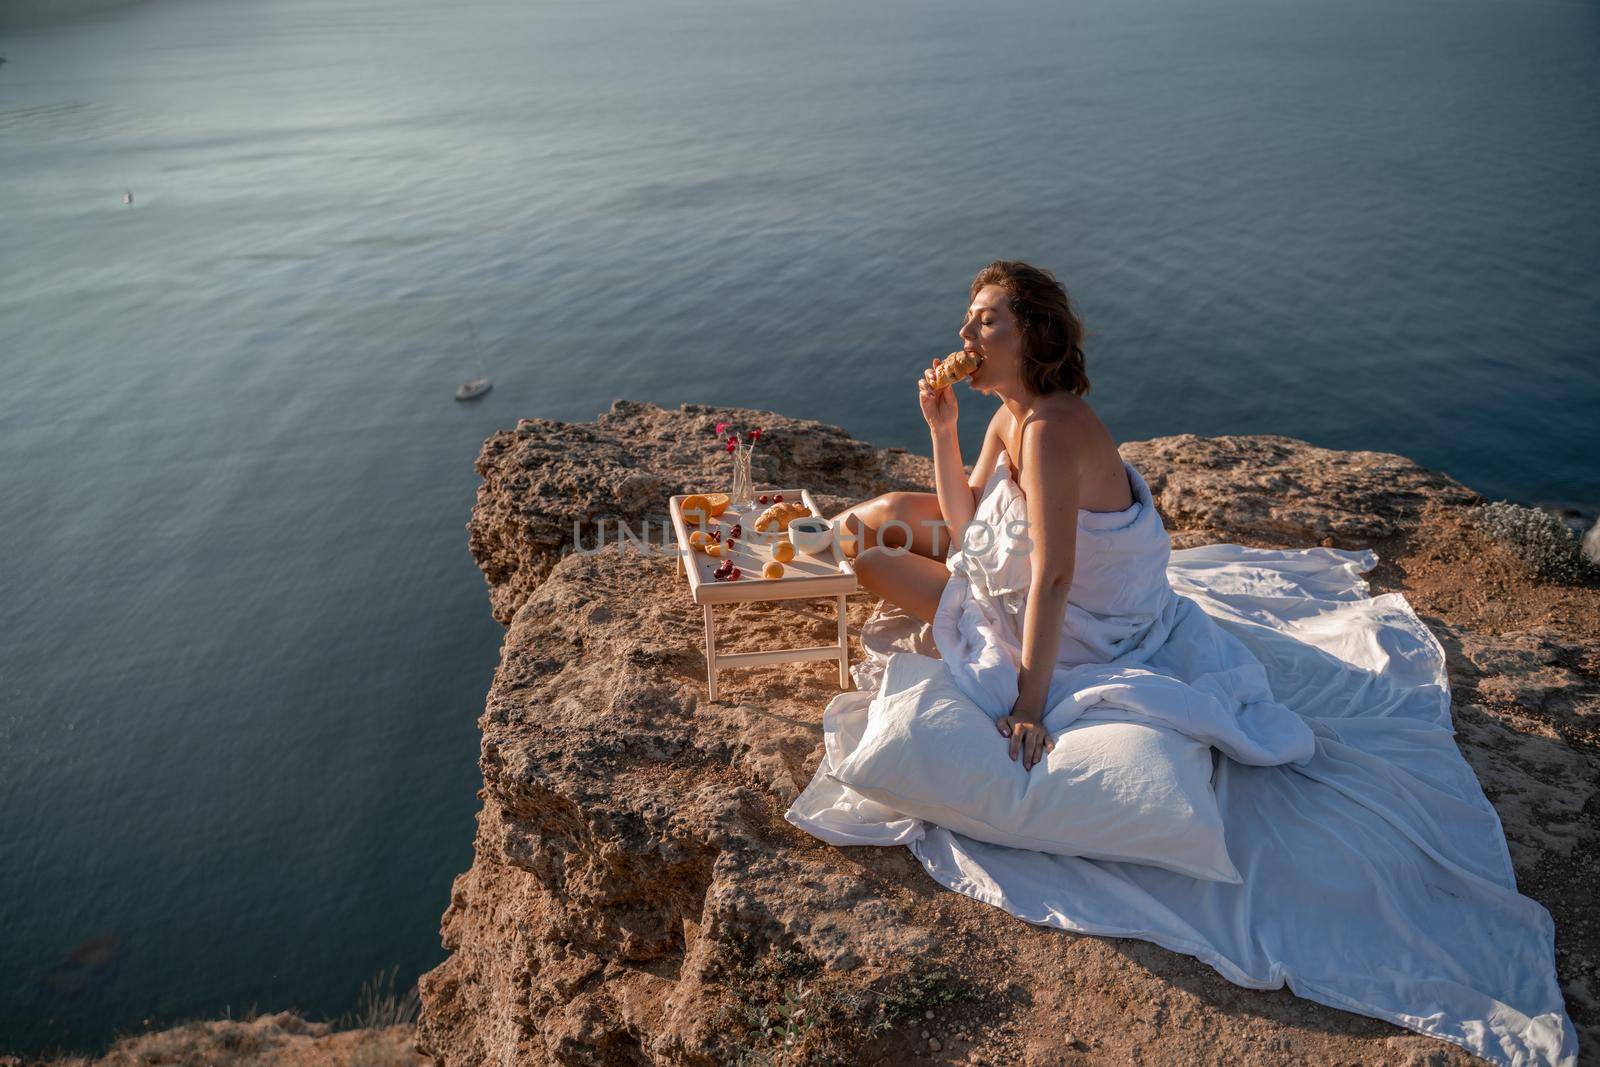 Woman covered with a blanket of bed relaxing and watching the seascape at sunrise. She holds a cup of coffee in her hand in front of her is a table with fruits and croissants. Wanderlust and freedom concept scene